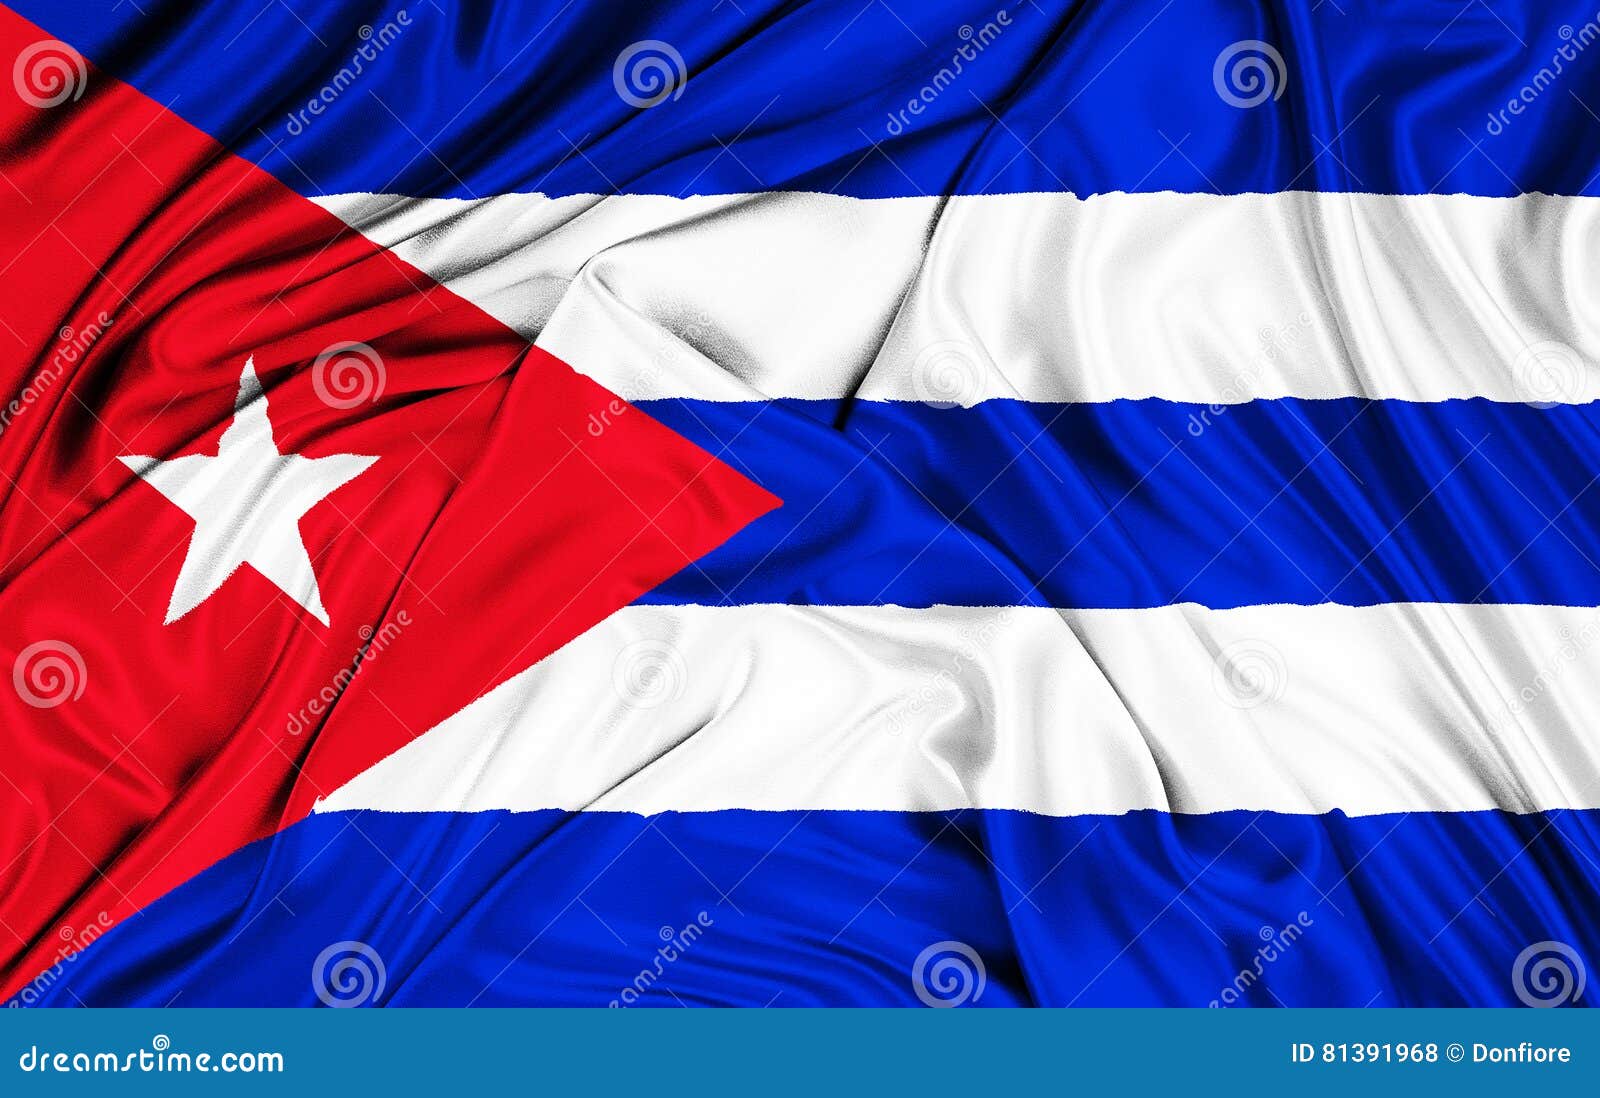 Waving Fabric Texture Of The Flag Of Cuba Color Red Blue And White Of Cuban Flag Stock Photo Image Of Background Cuba